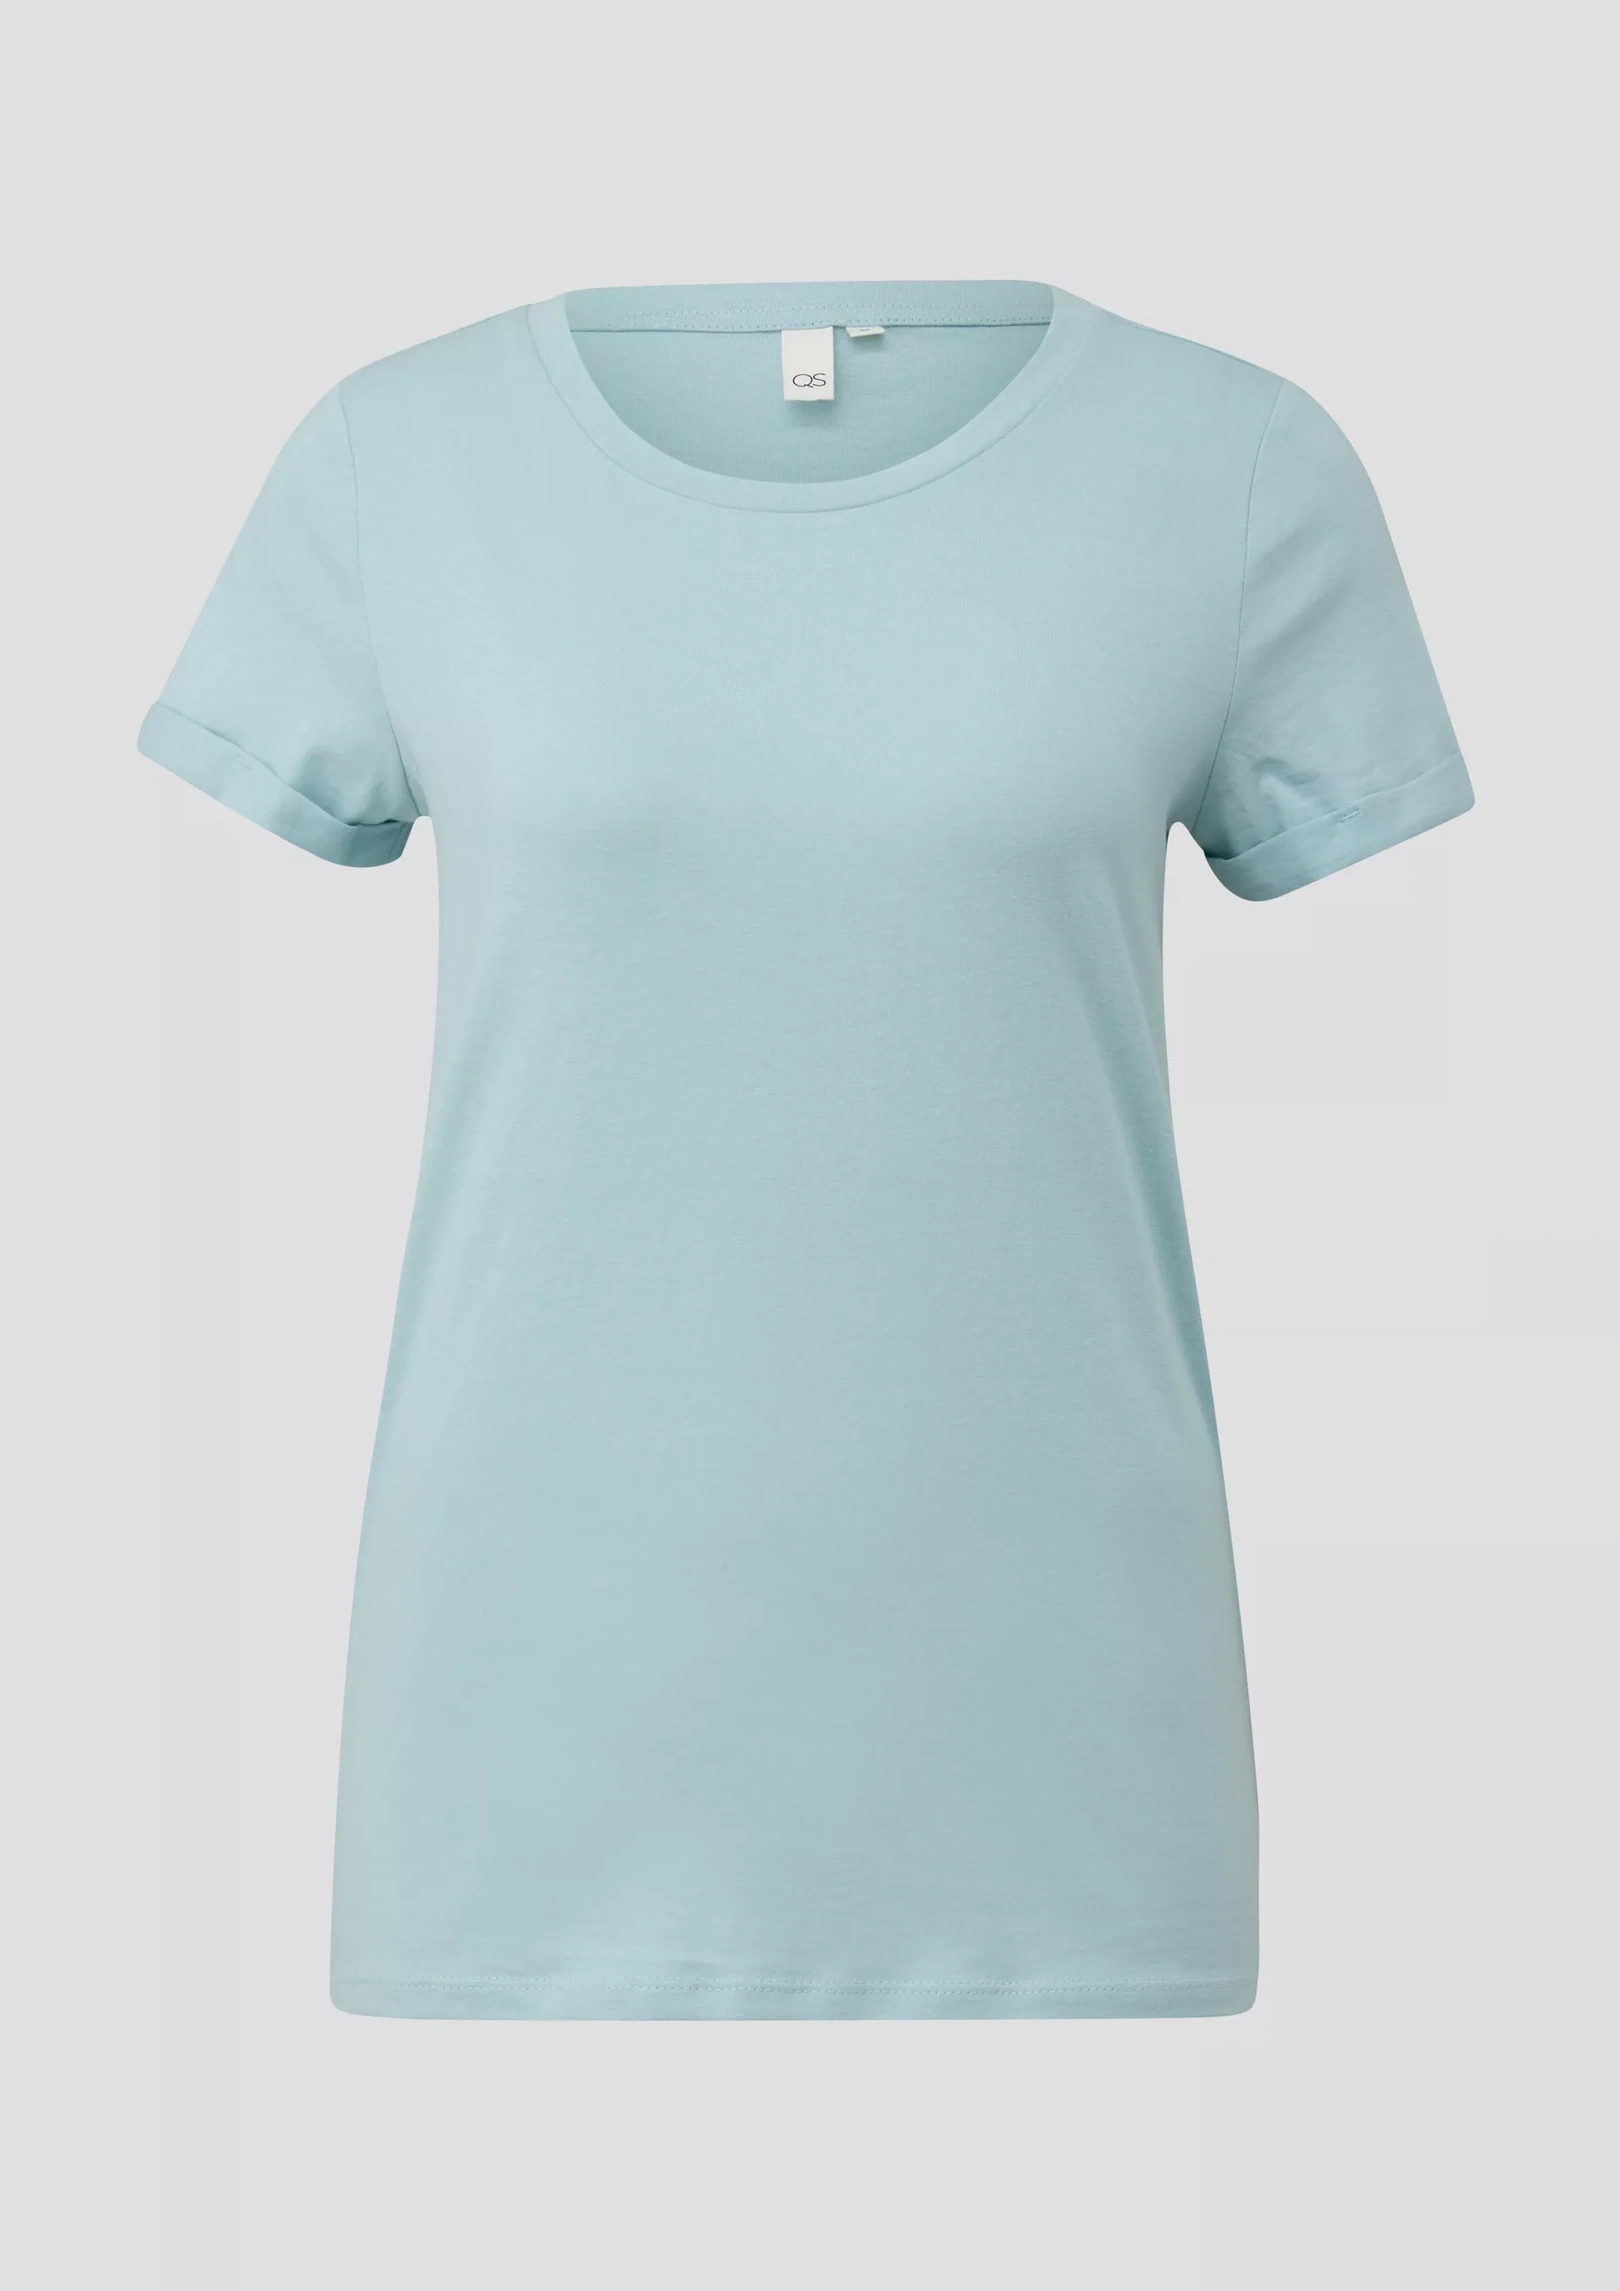 Woman Jersey T shirt Regular Fit Pale Turquoise S'OLIVER.2064174 (7)